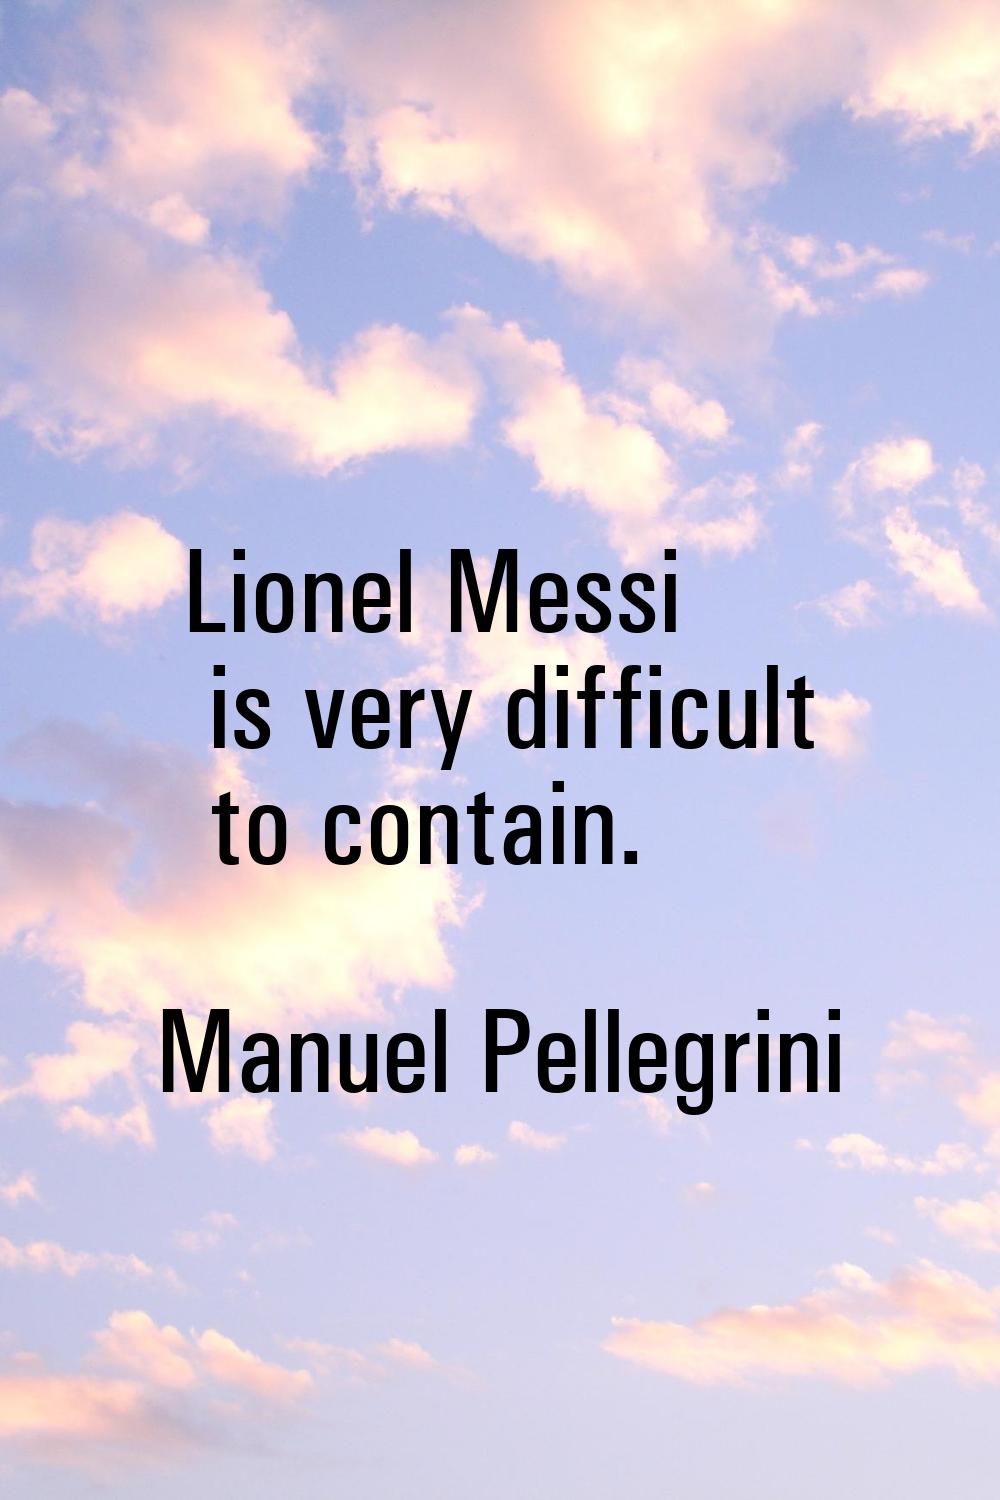 Lionel Messi is very difficult to contain.